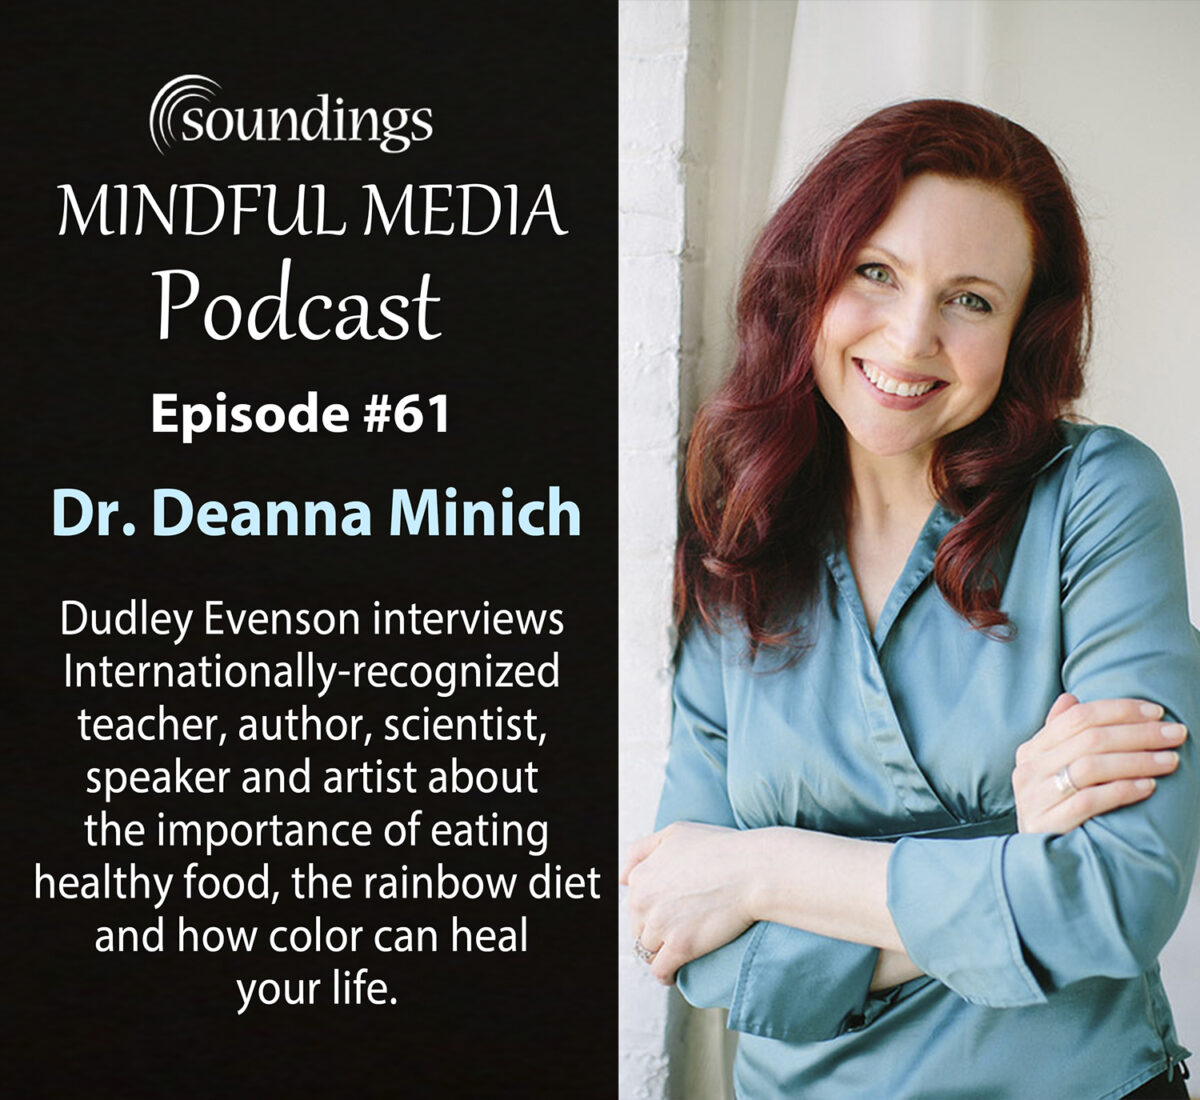 Dr. Deanna Minich Discusses Rainbow Diet and Color Can Heal Your Life on Soundings Mindful Media Podcast